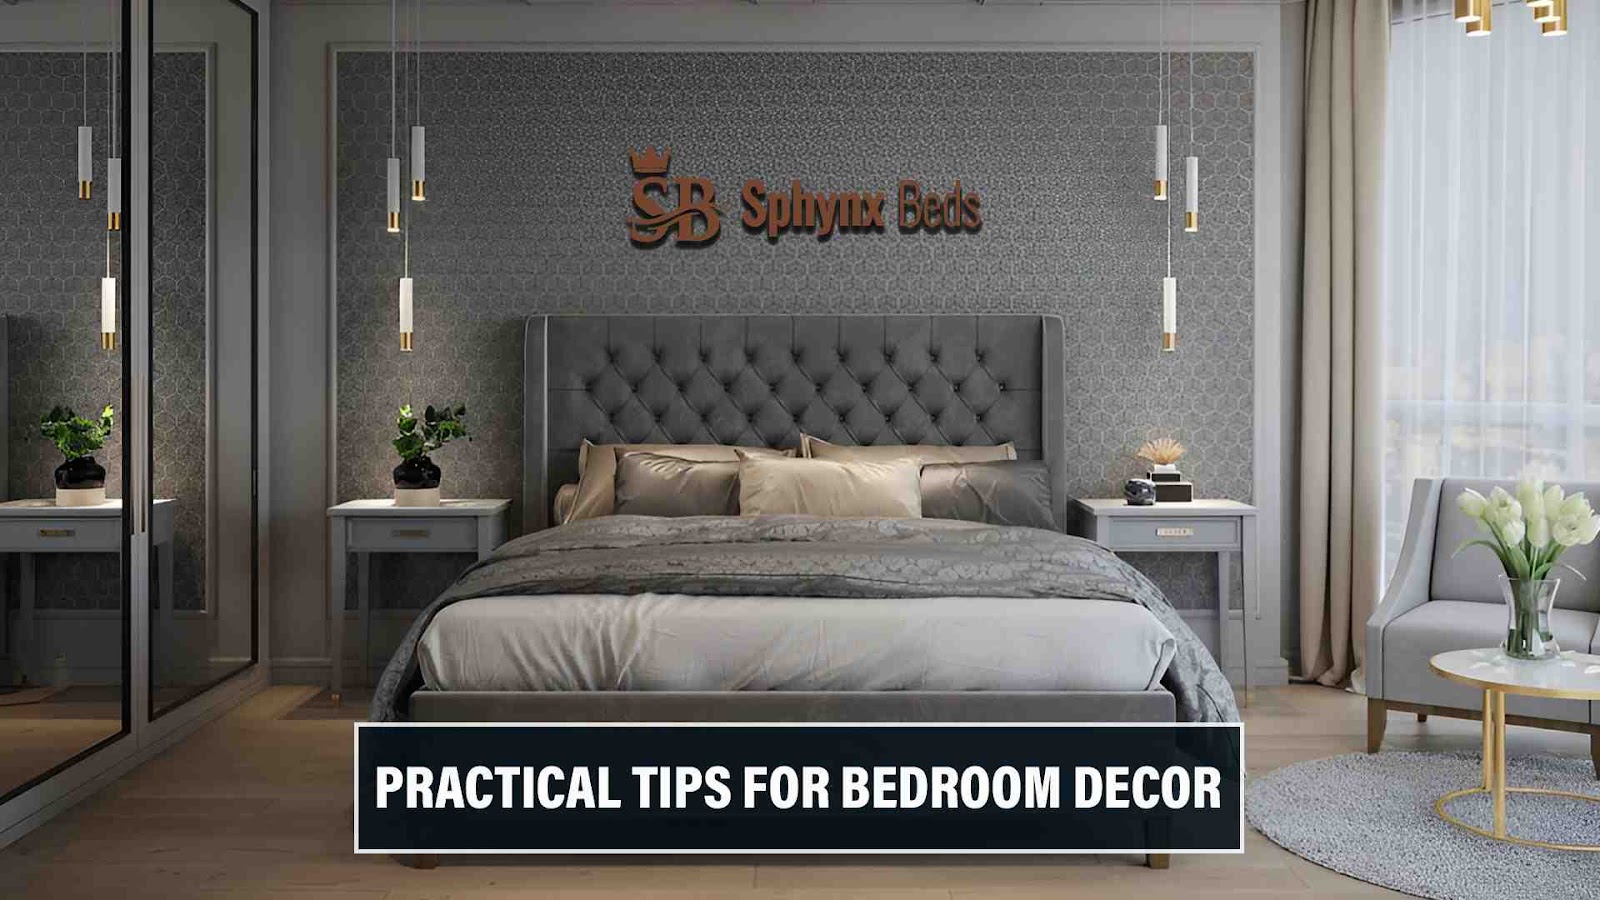 Practical Tips for Bedroom Decor